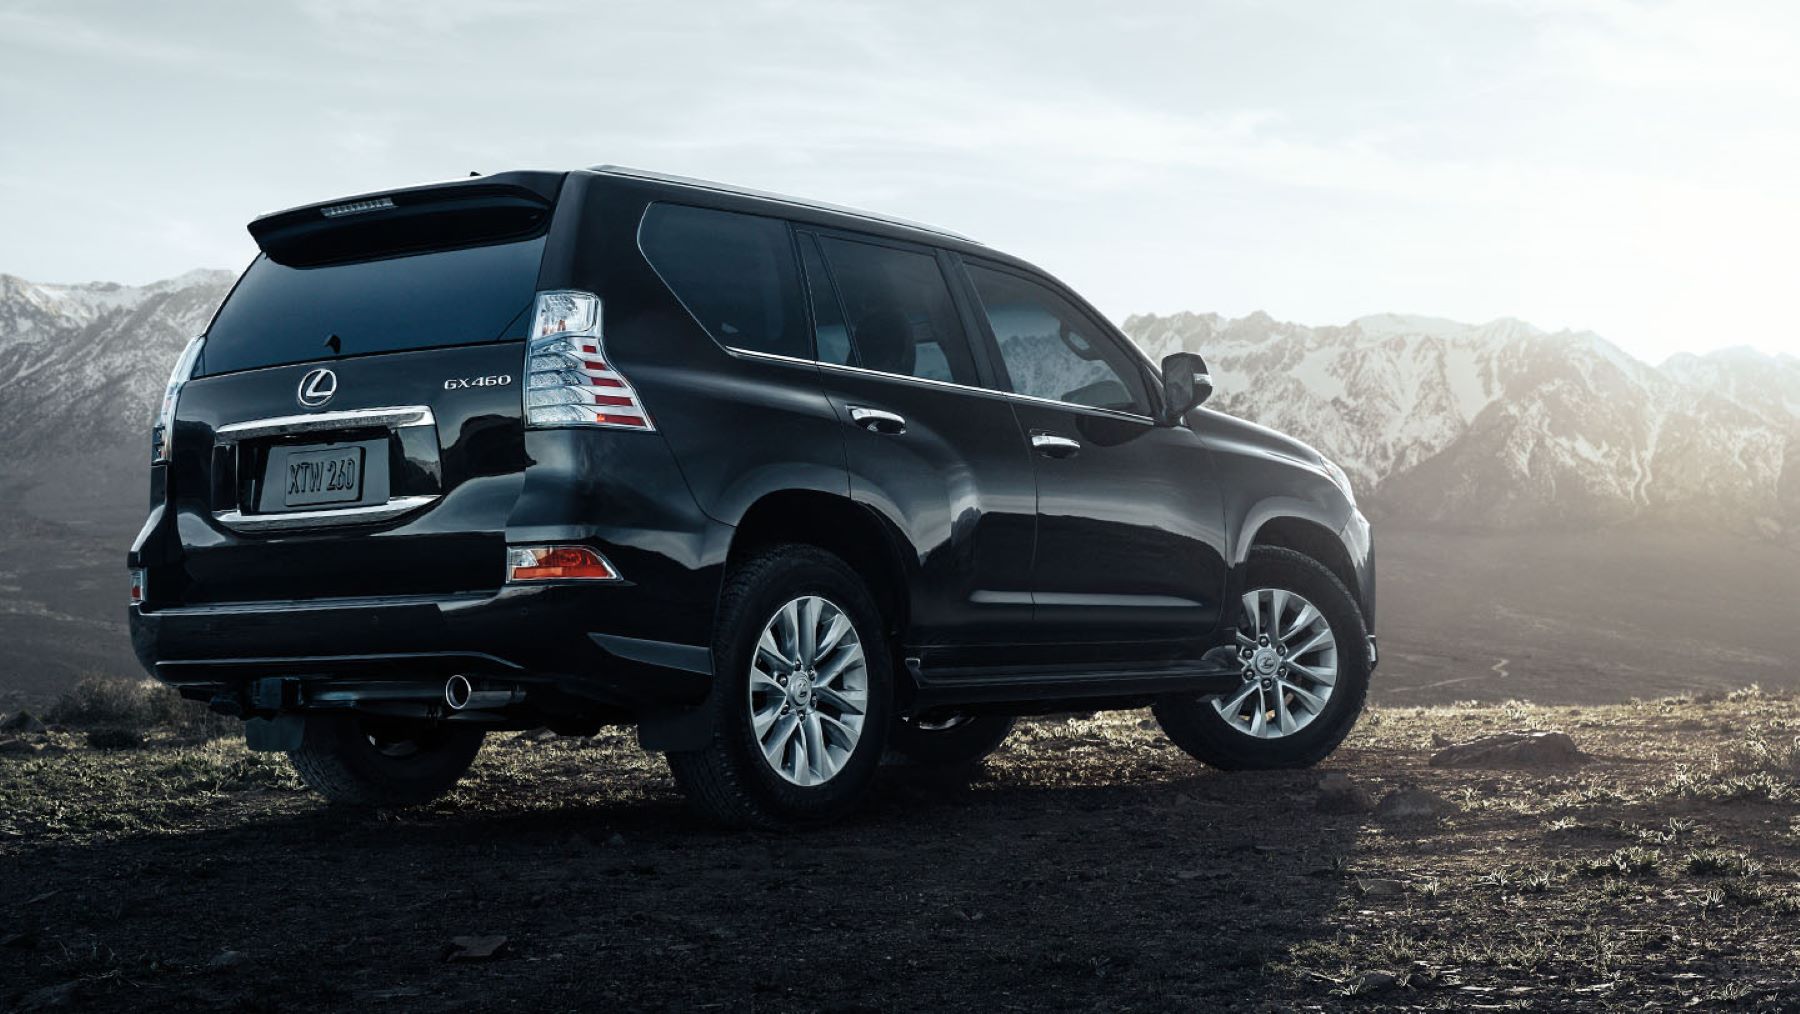 A rear side profile shot of a black 2023 Lexus GX 460 full-size luxury SUV model parked on a dirt cliff